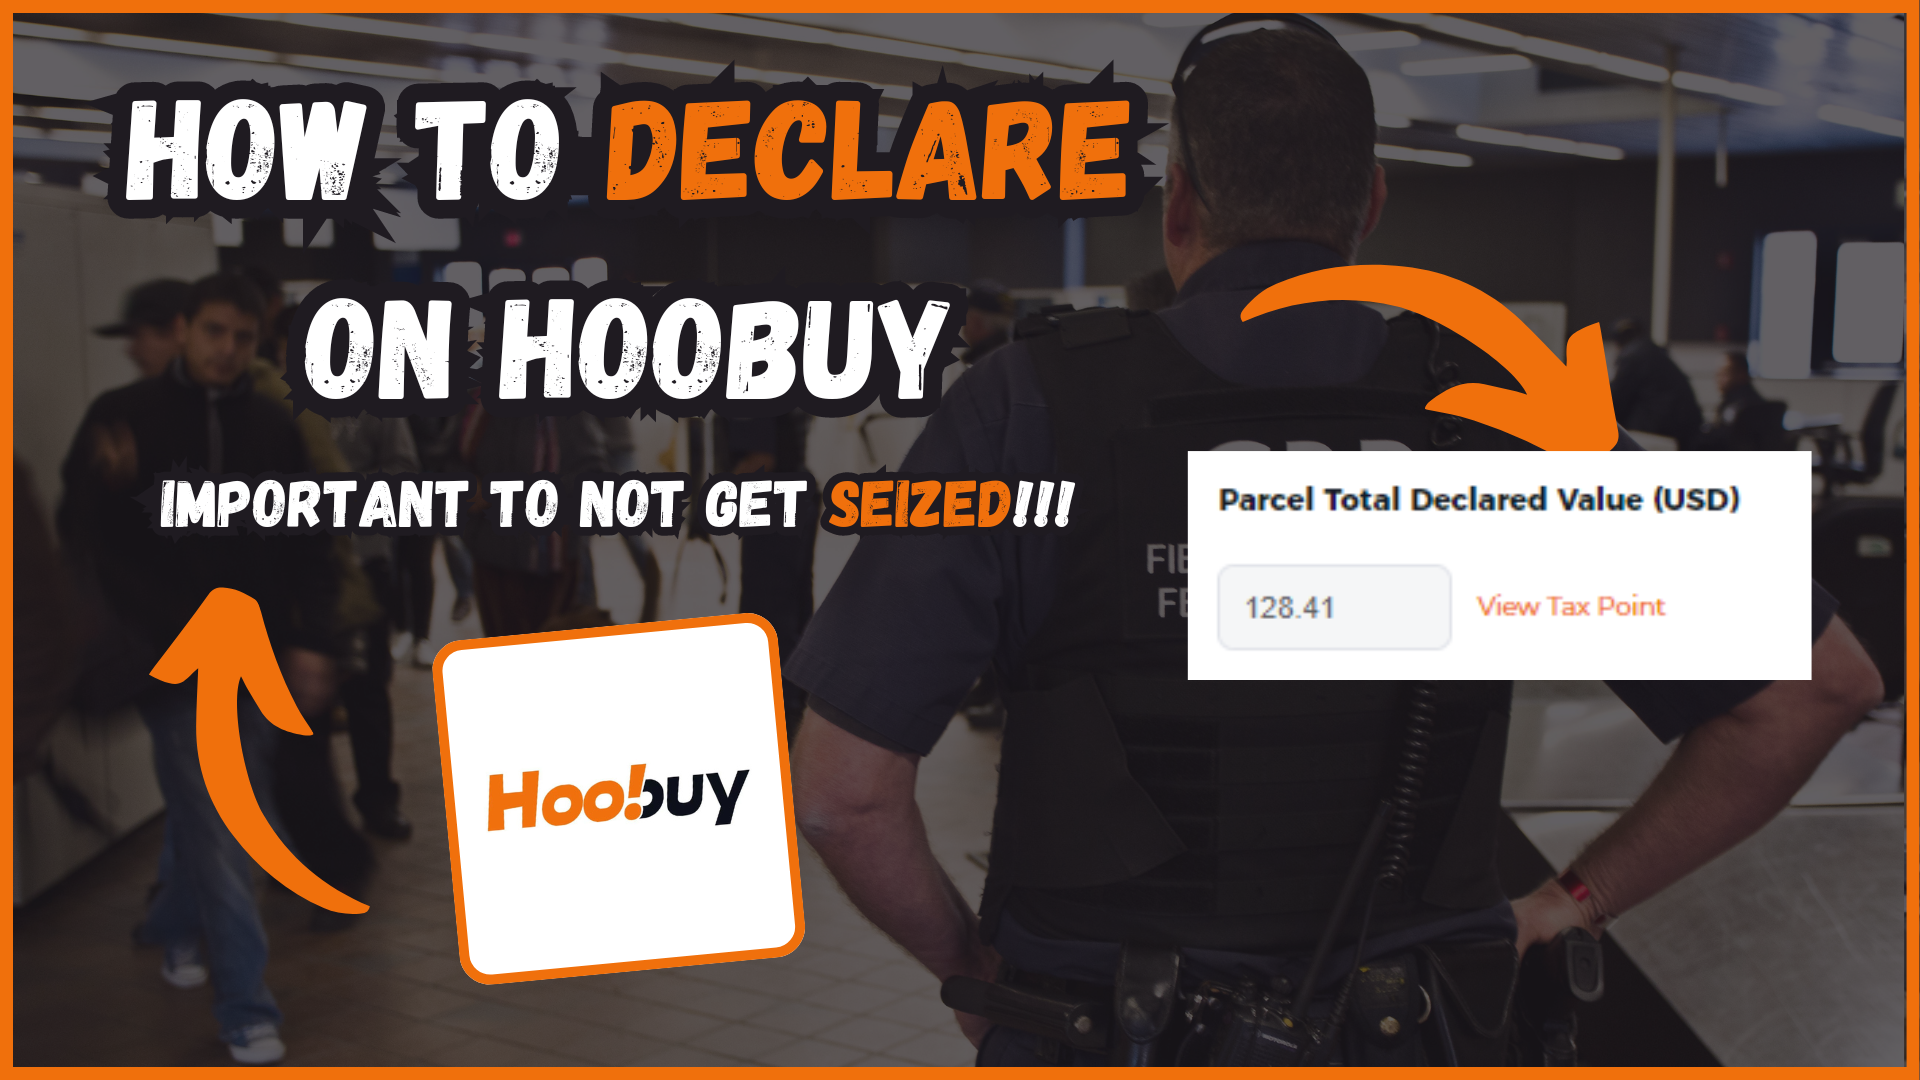 Article: How to Declare on Hoobuy